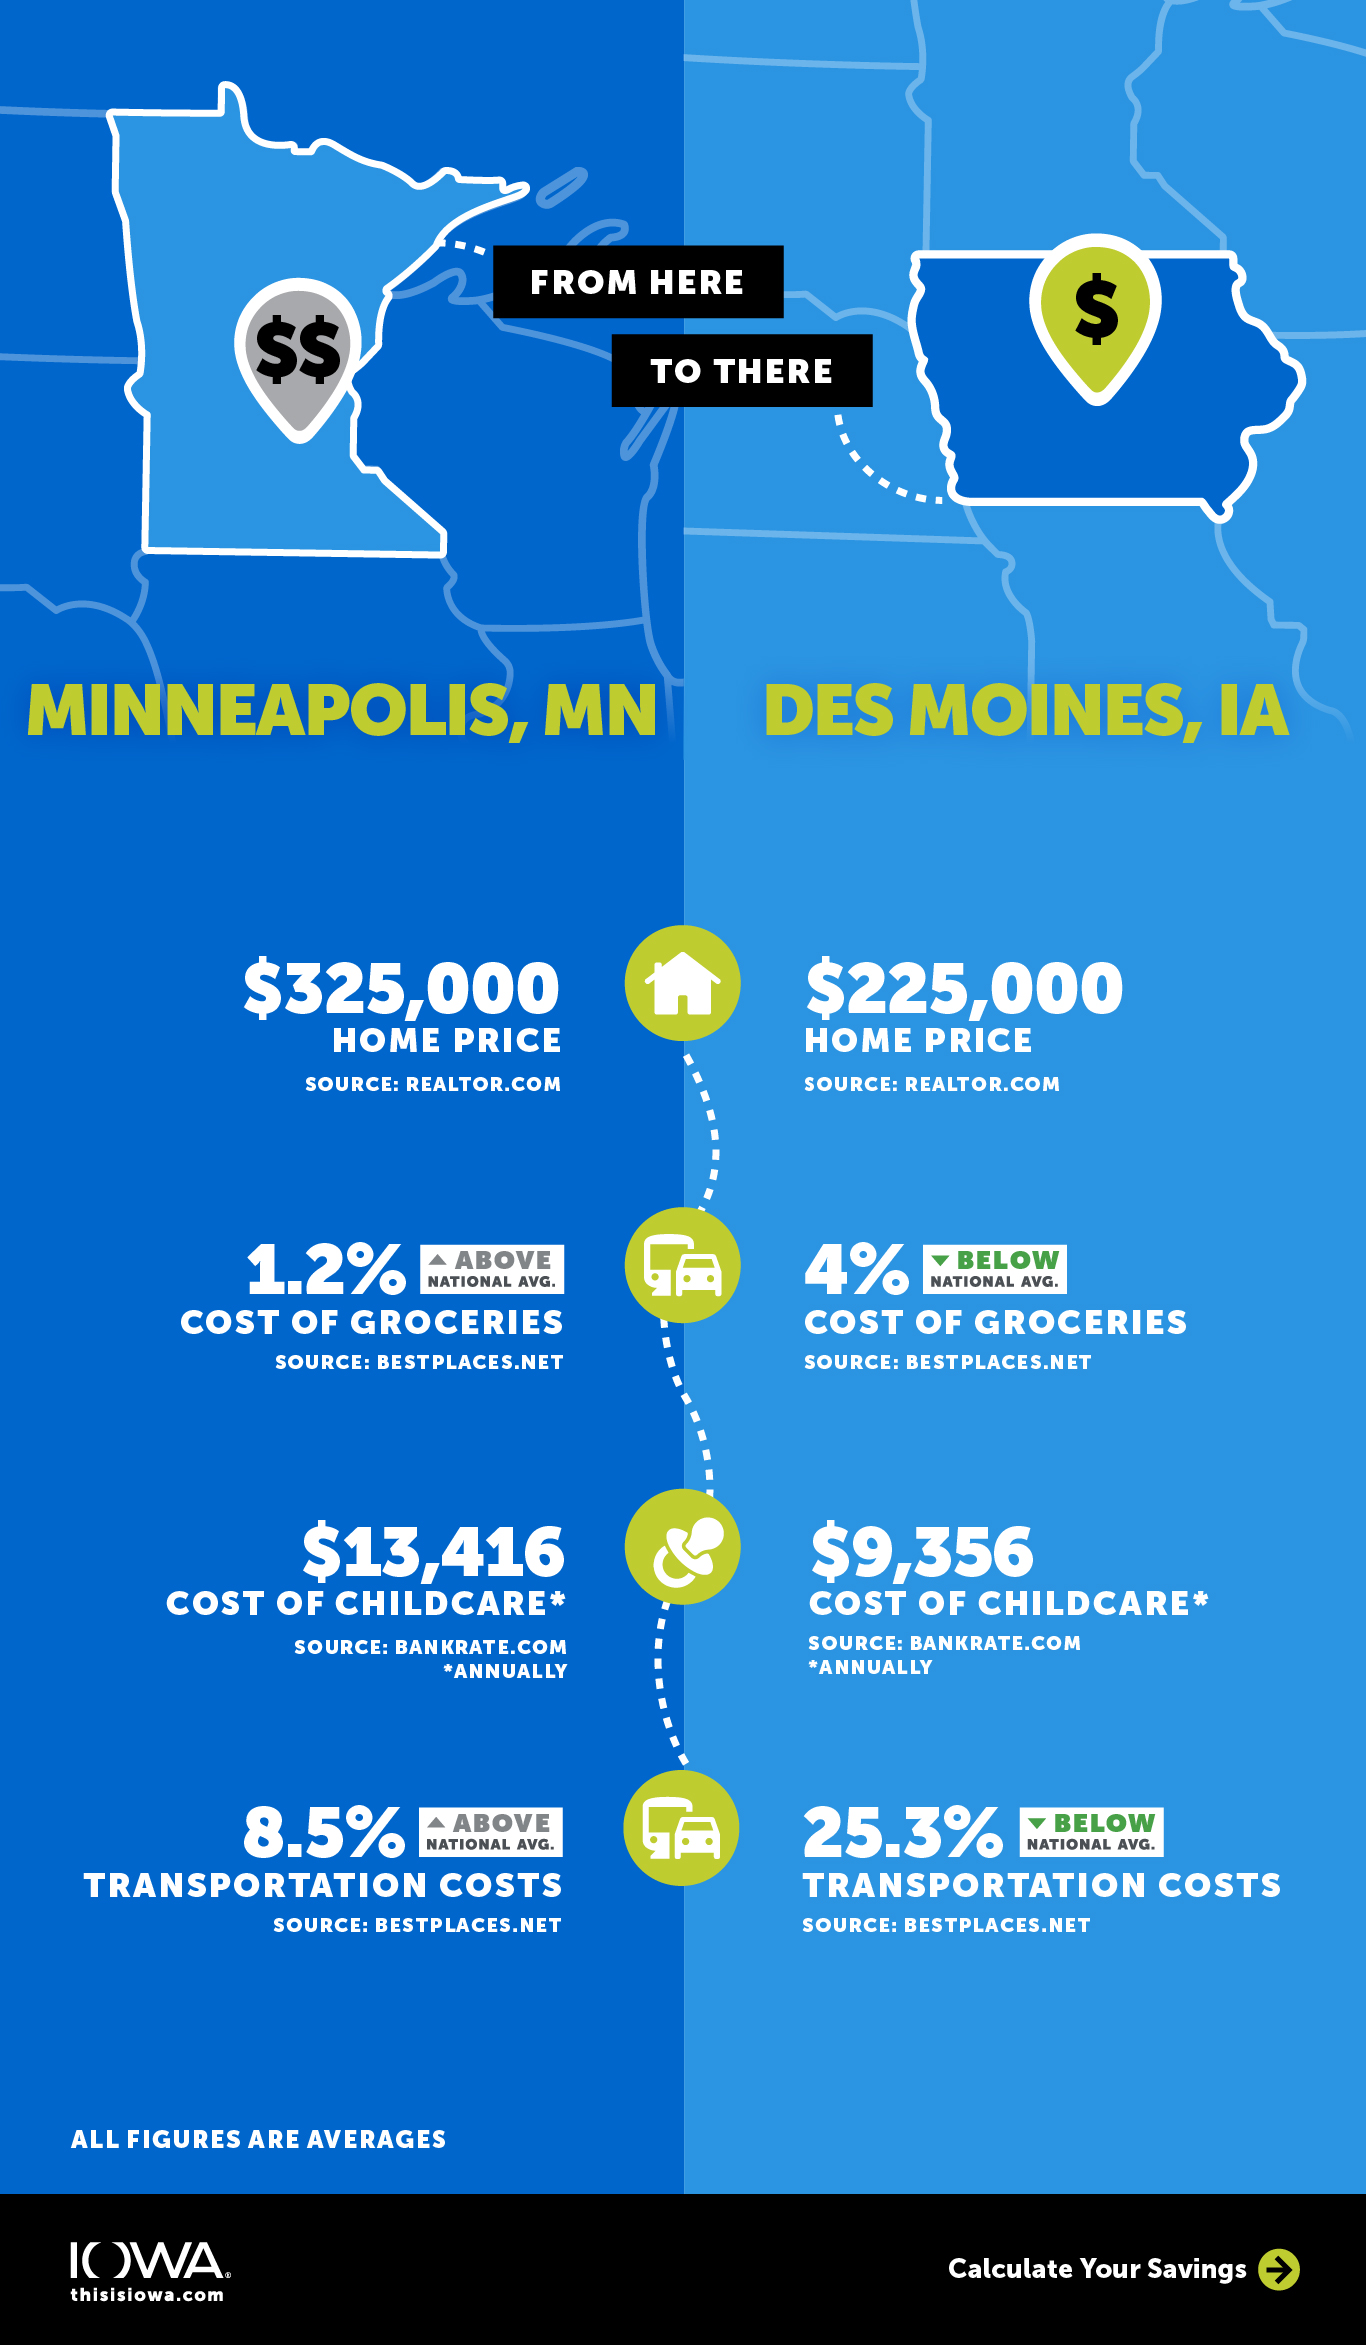 Costs associated with moving from Minneapolis, MN to Des Moines, IA